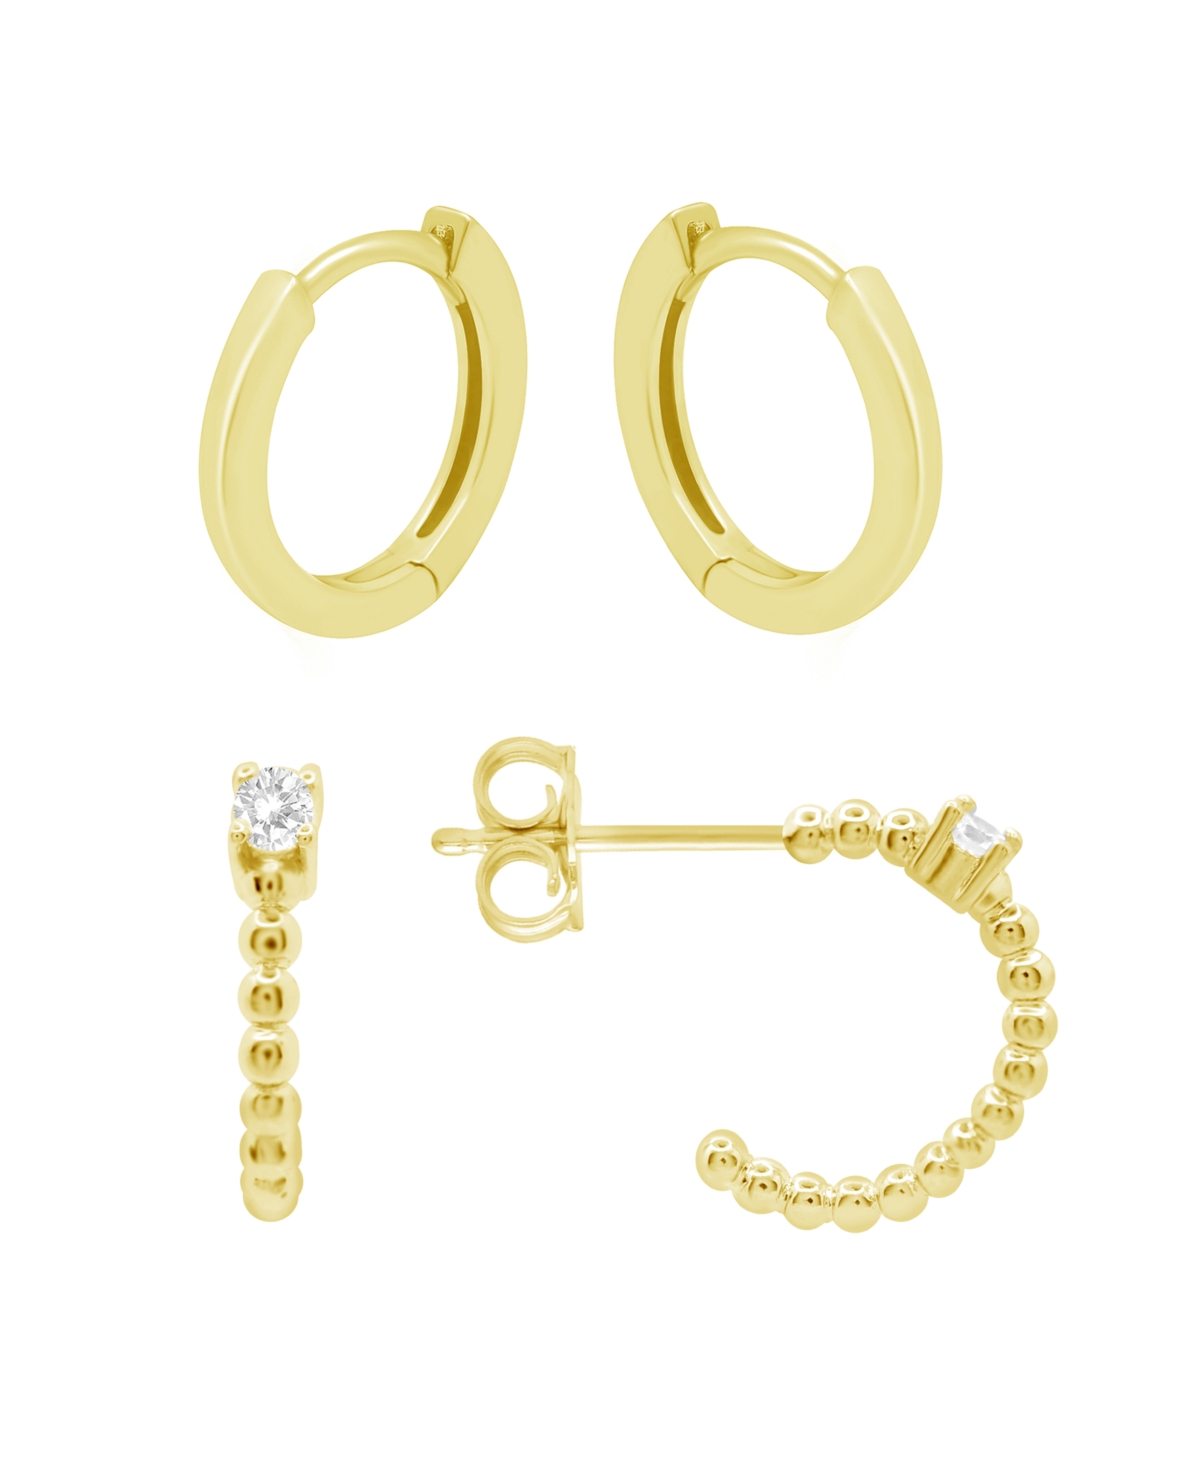 High Polished Duo Hoop Earring Set, Gold Plate - Gold-Tone